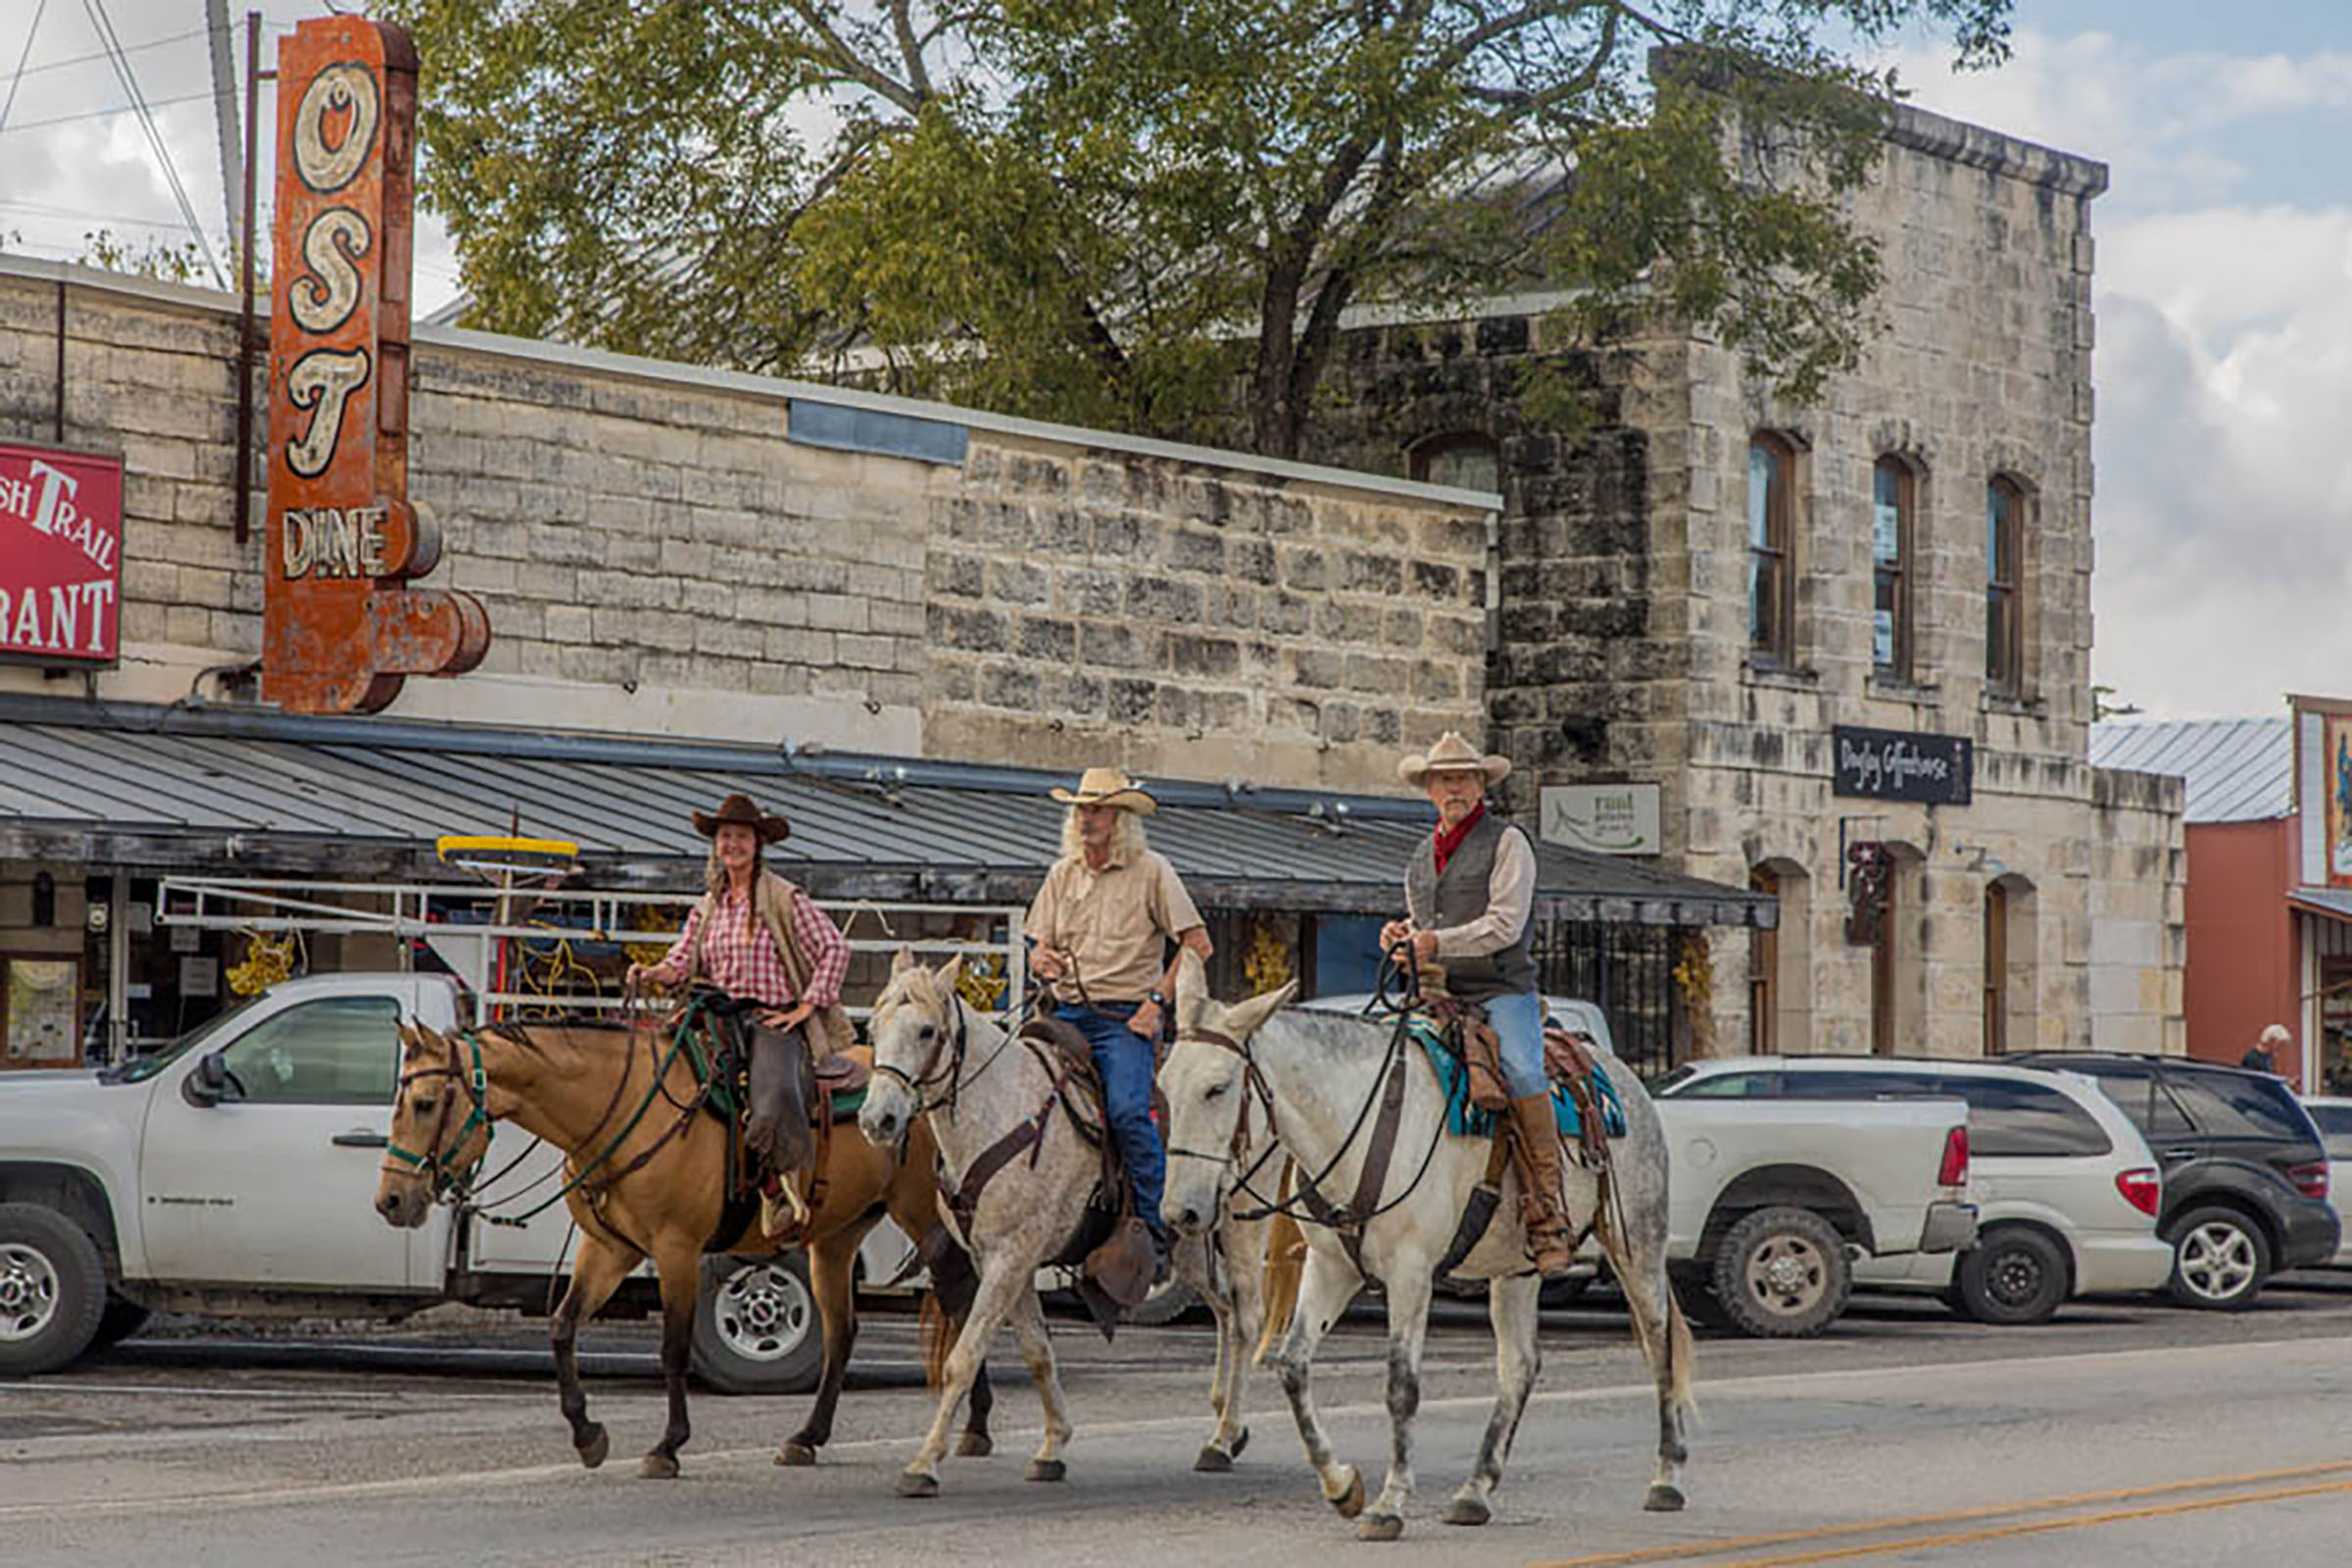 Three people on horses ride through town of Bandera